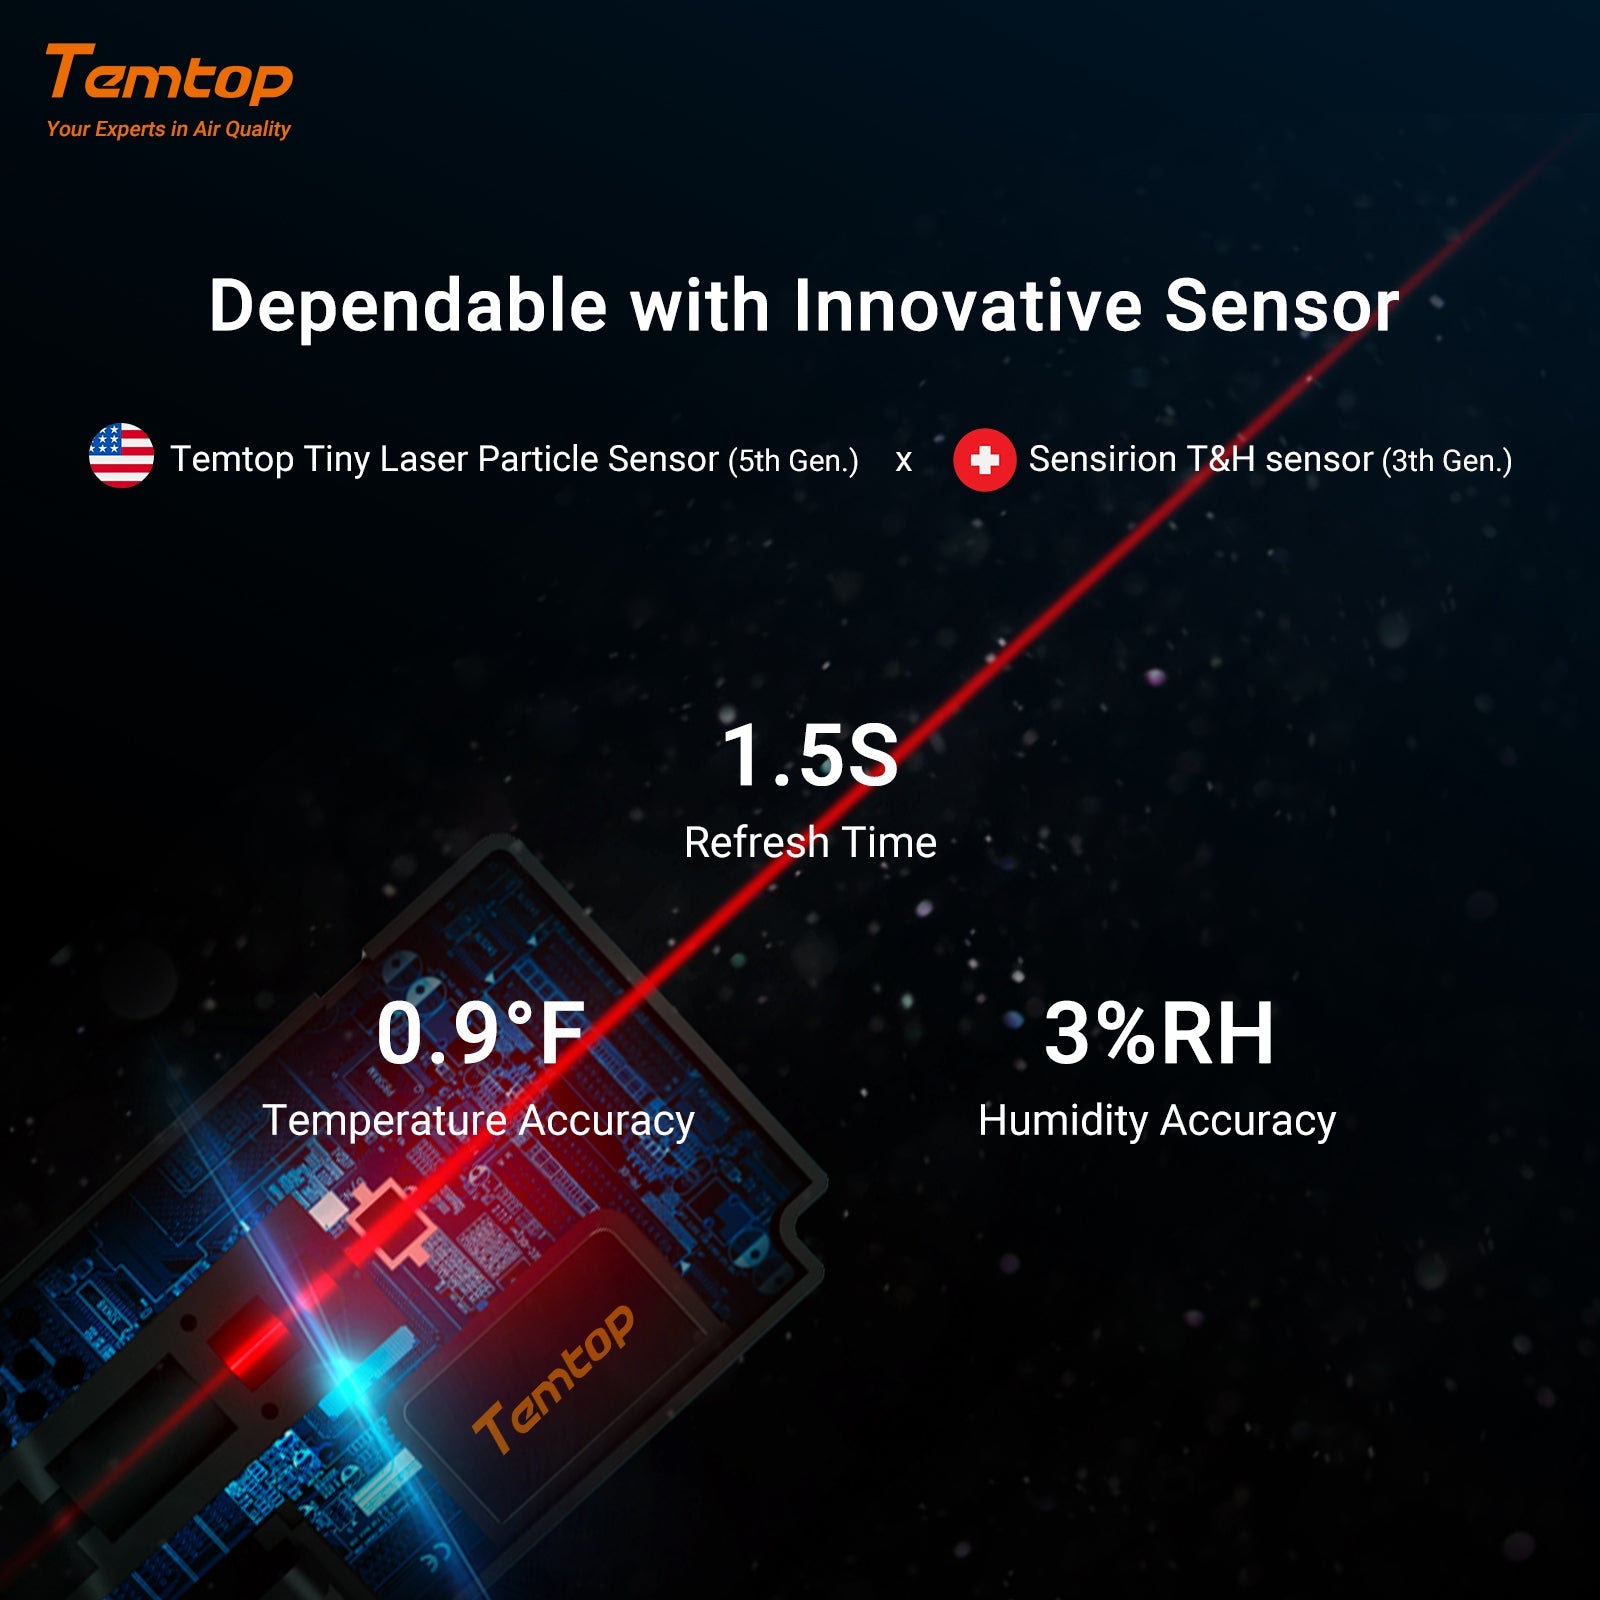 S1 Temperature Humidity Sensor for Real-time Monitoring